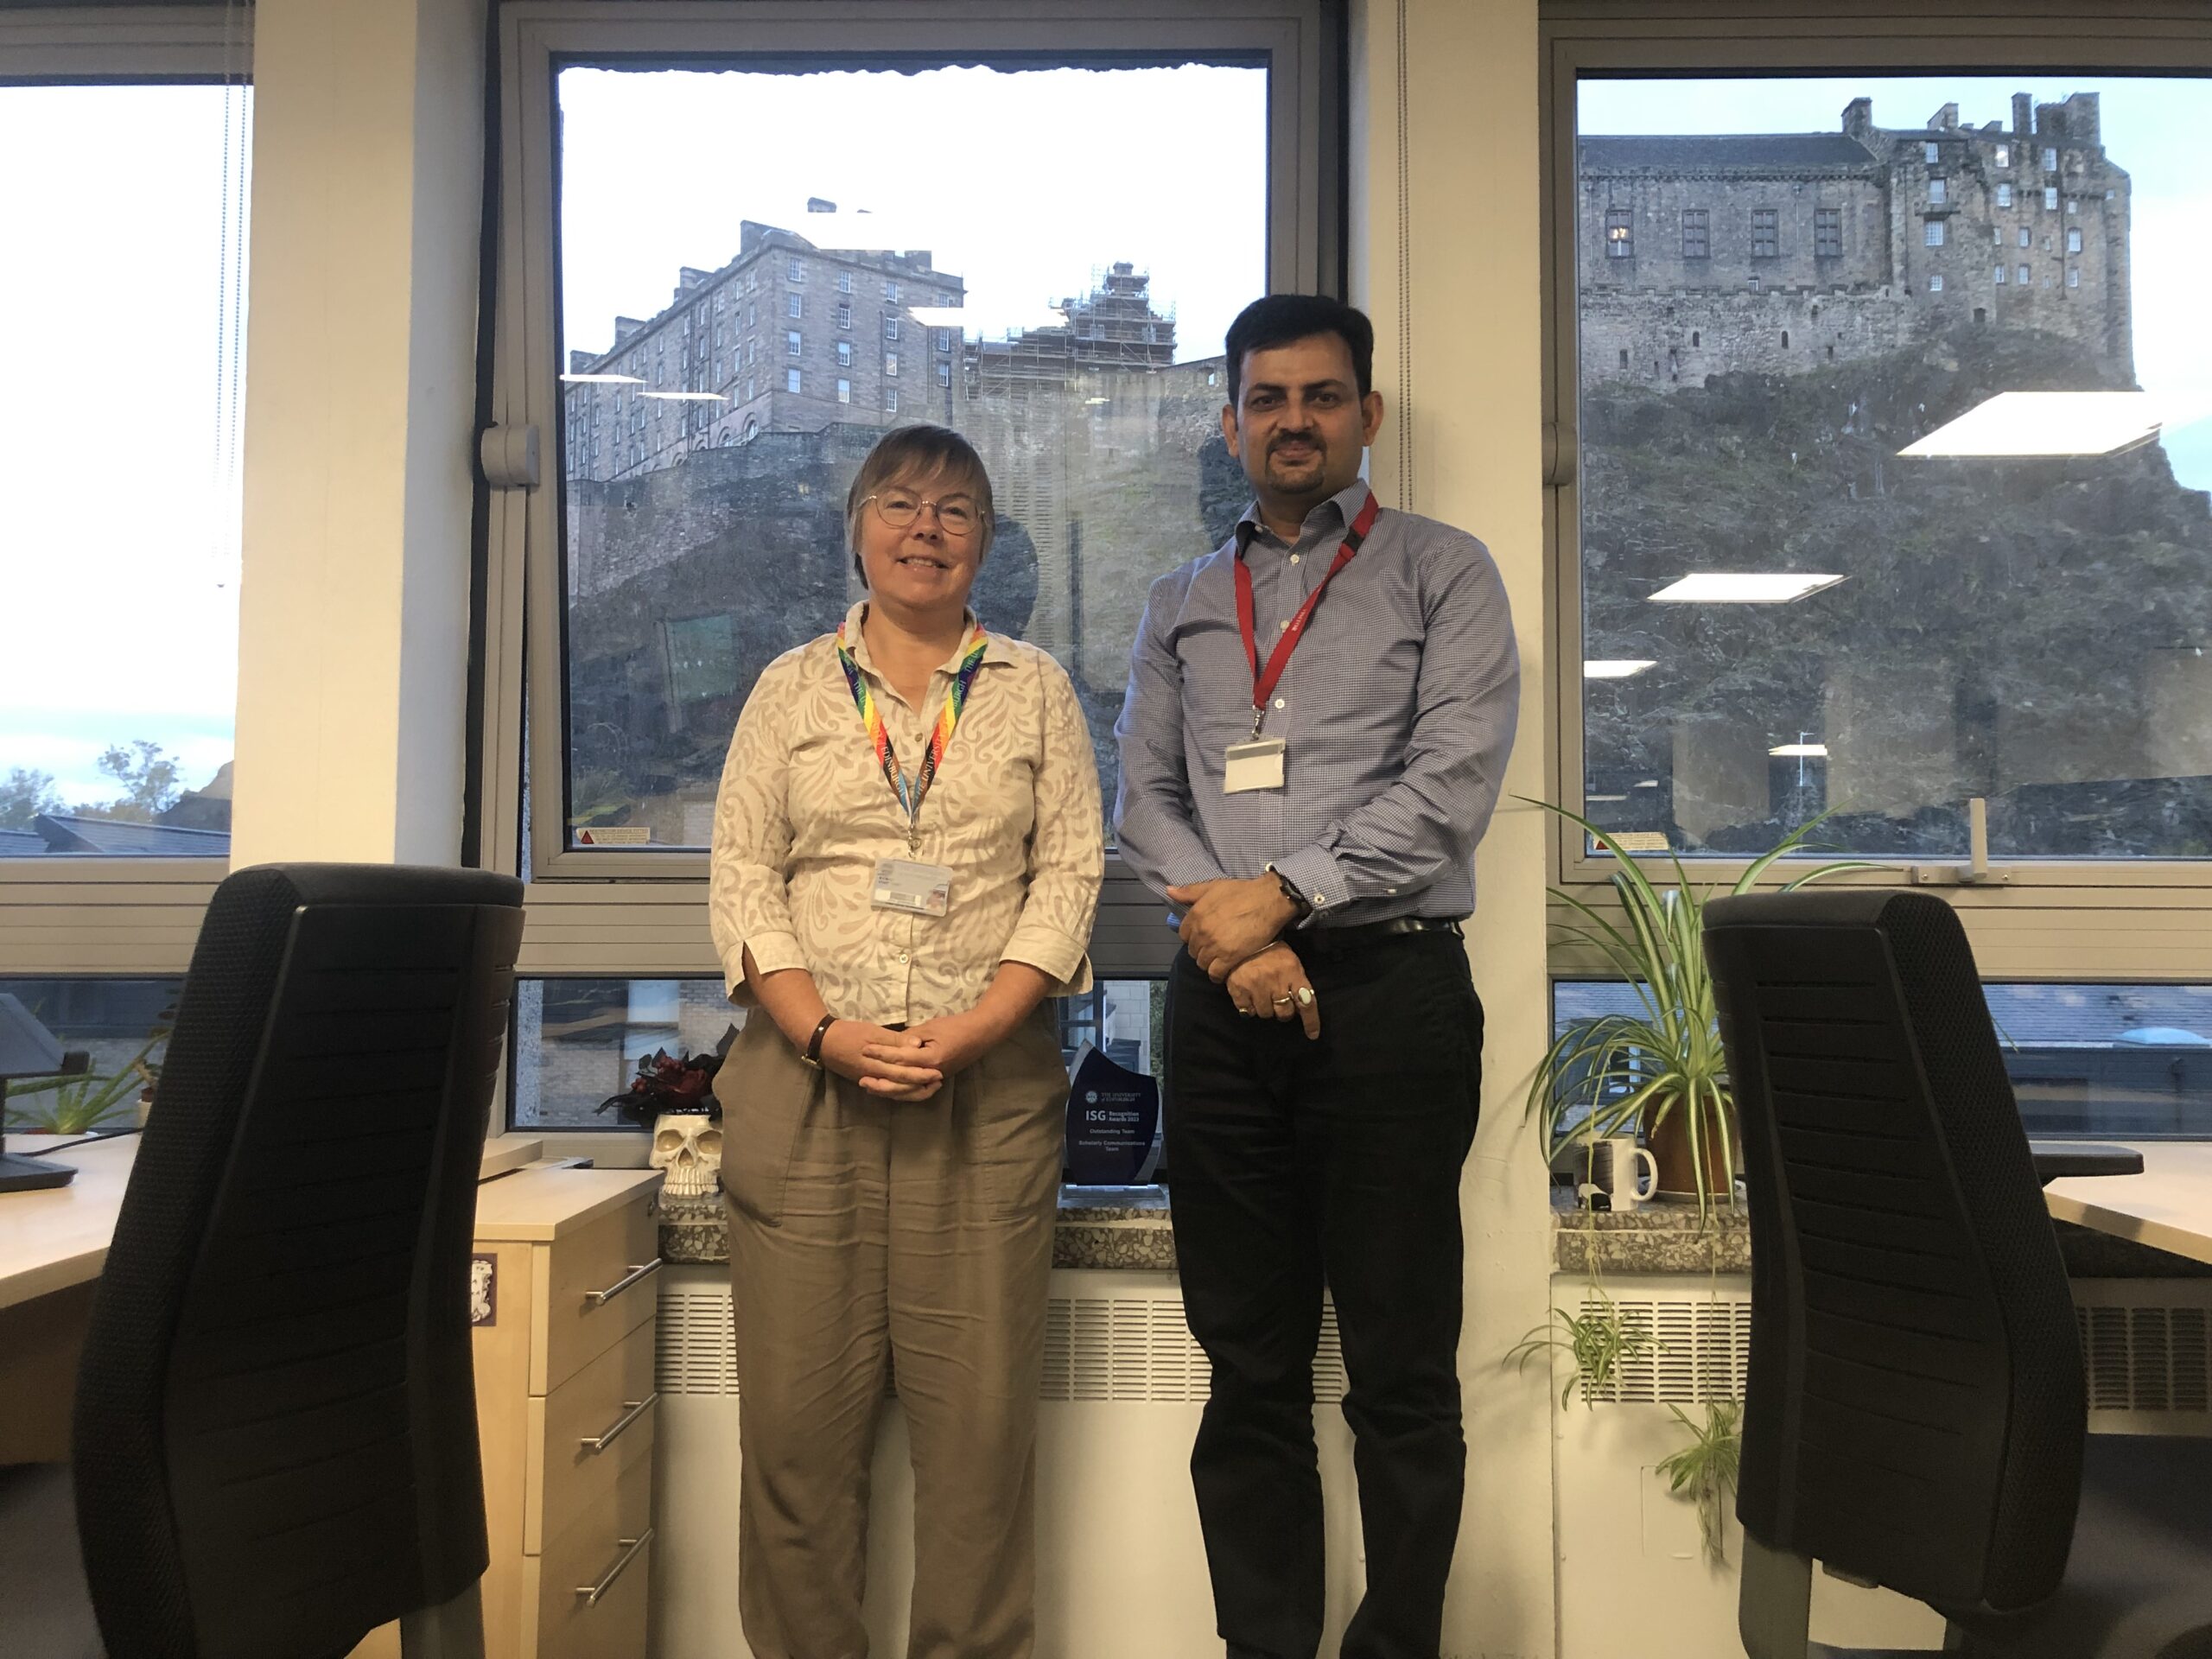 2 people in an office with Edinburgh Castle in the window.